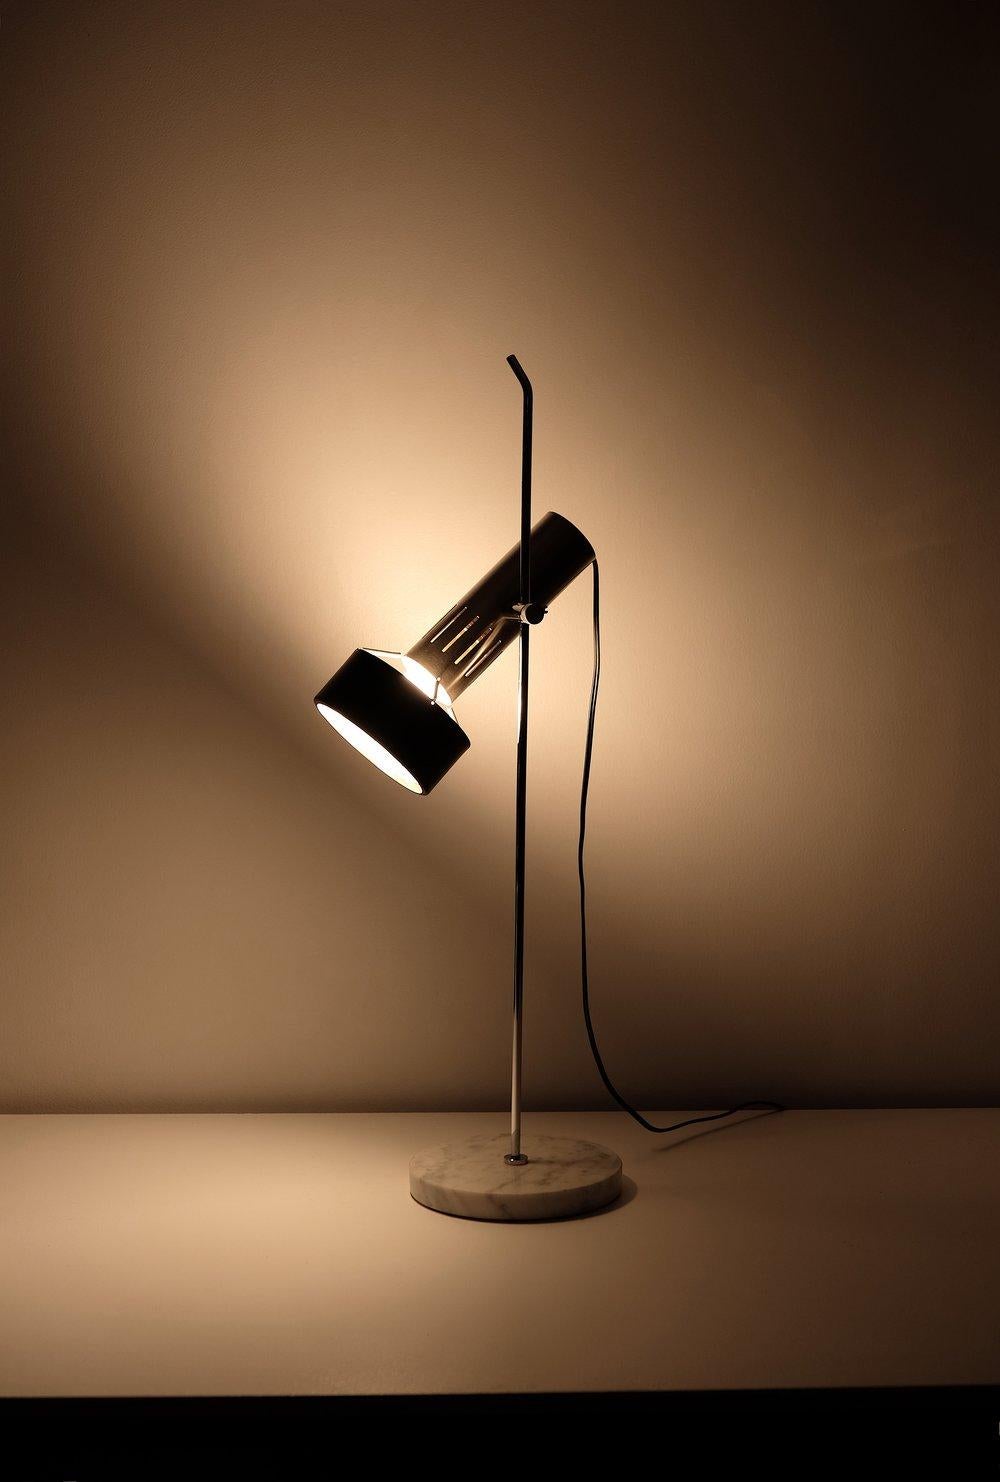 Rare A4 Alain Richard table lamp for Disderot made in France. Polished steel and lacquered aluminium shade. Polished steel fittings, polished chromed steel fittings, polished Carrara marble base. 40-60 watts E-26 Edison medium base incandescent bulb